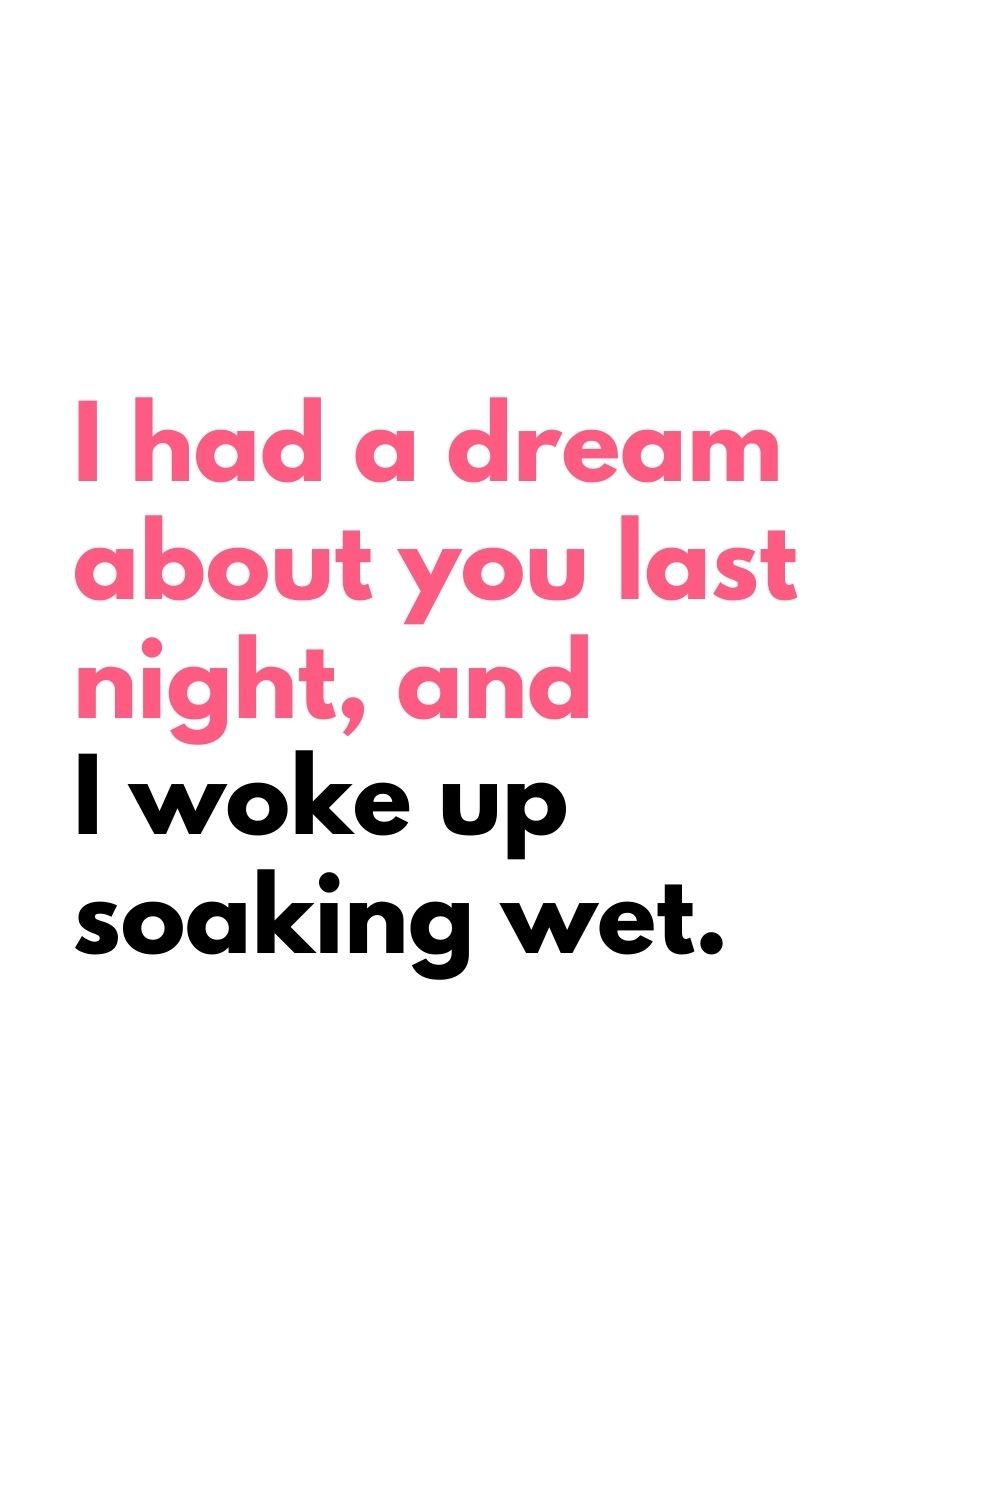 i had a dream about you last night and i woke up soaking wet